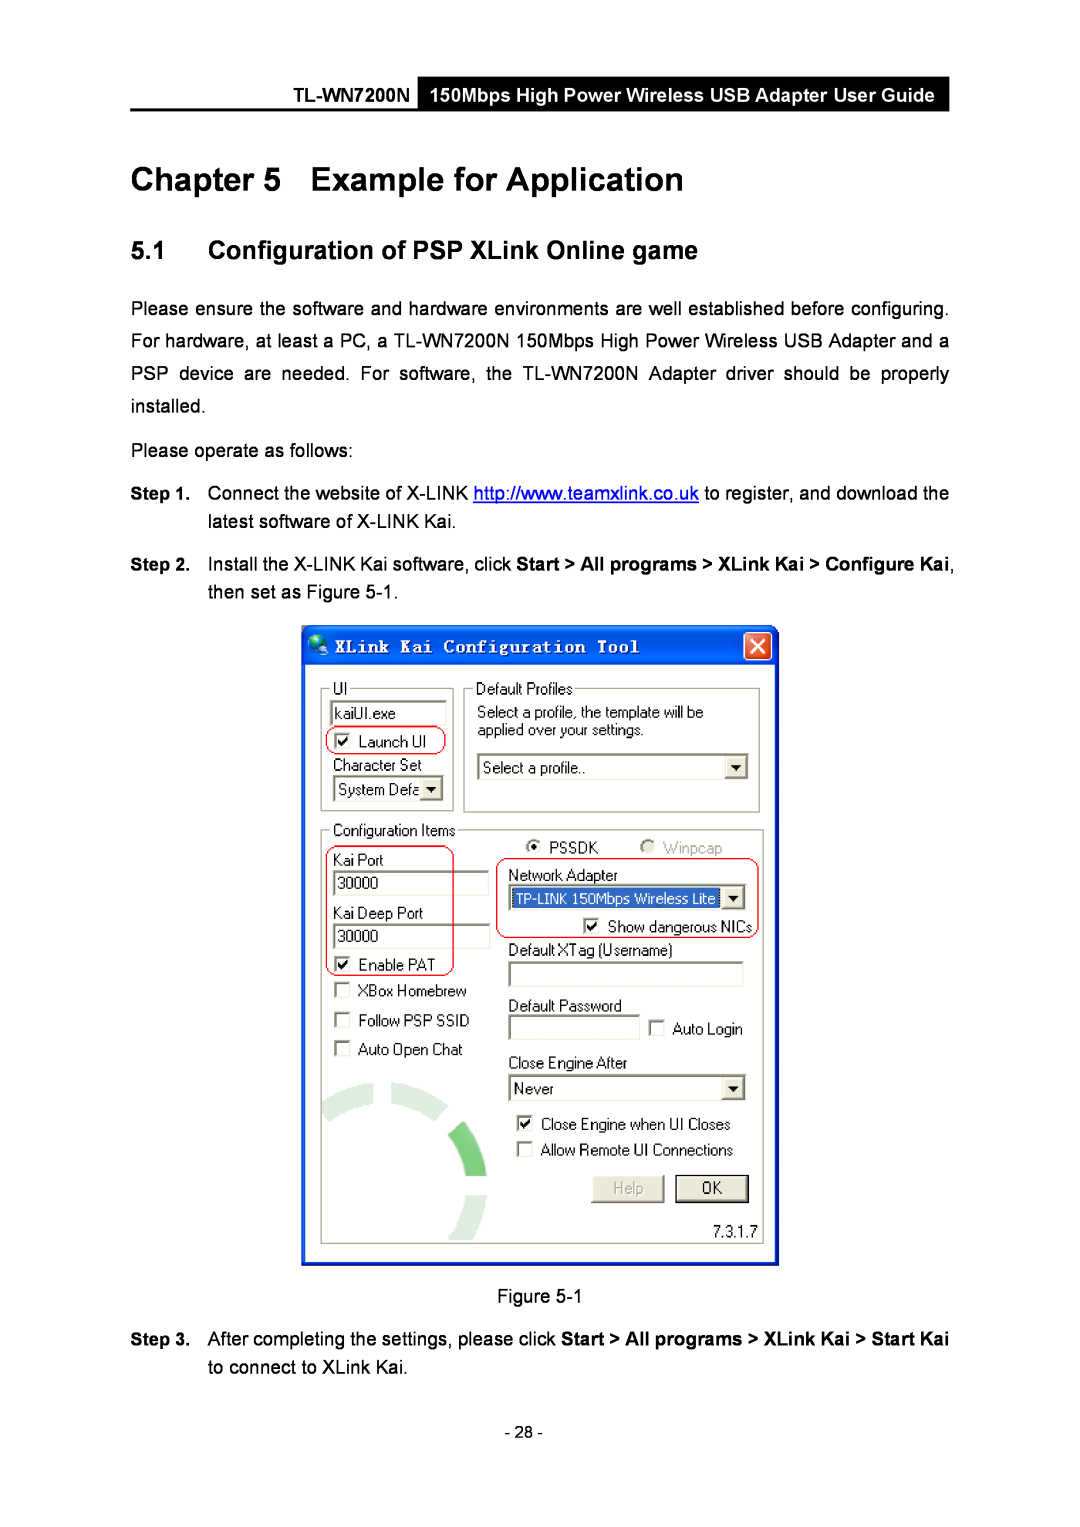 TP-Link TL-WN7200N manual Example for Application, Configuration of PSP XLink Online game 